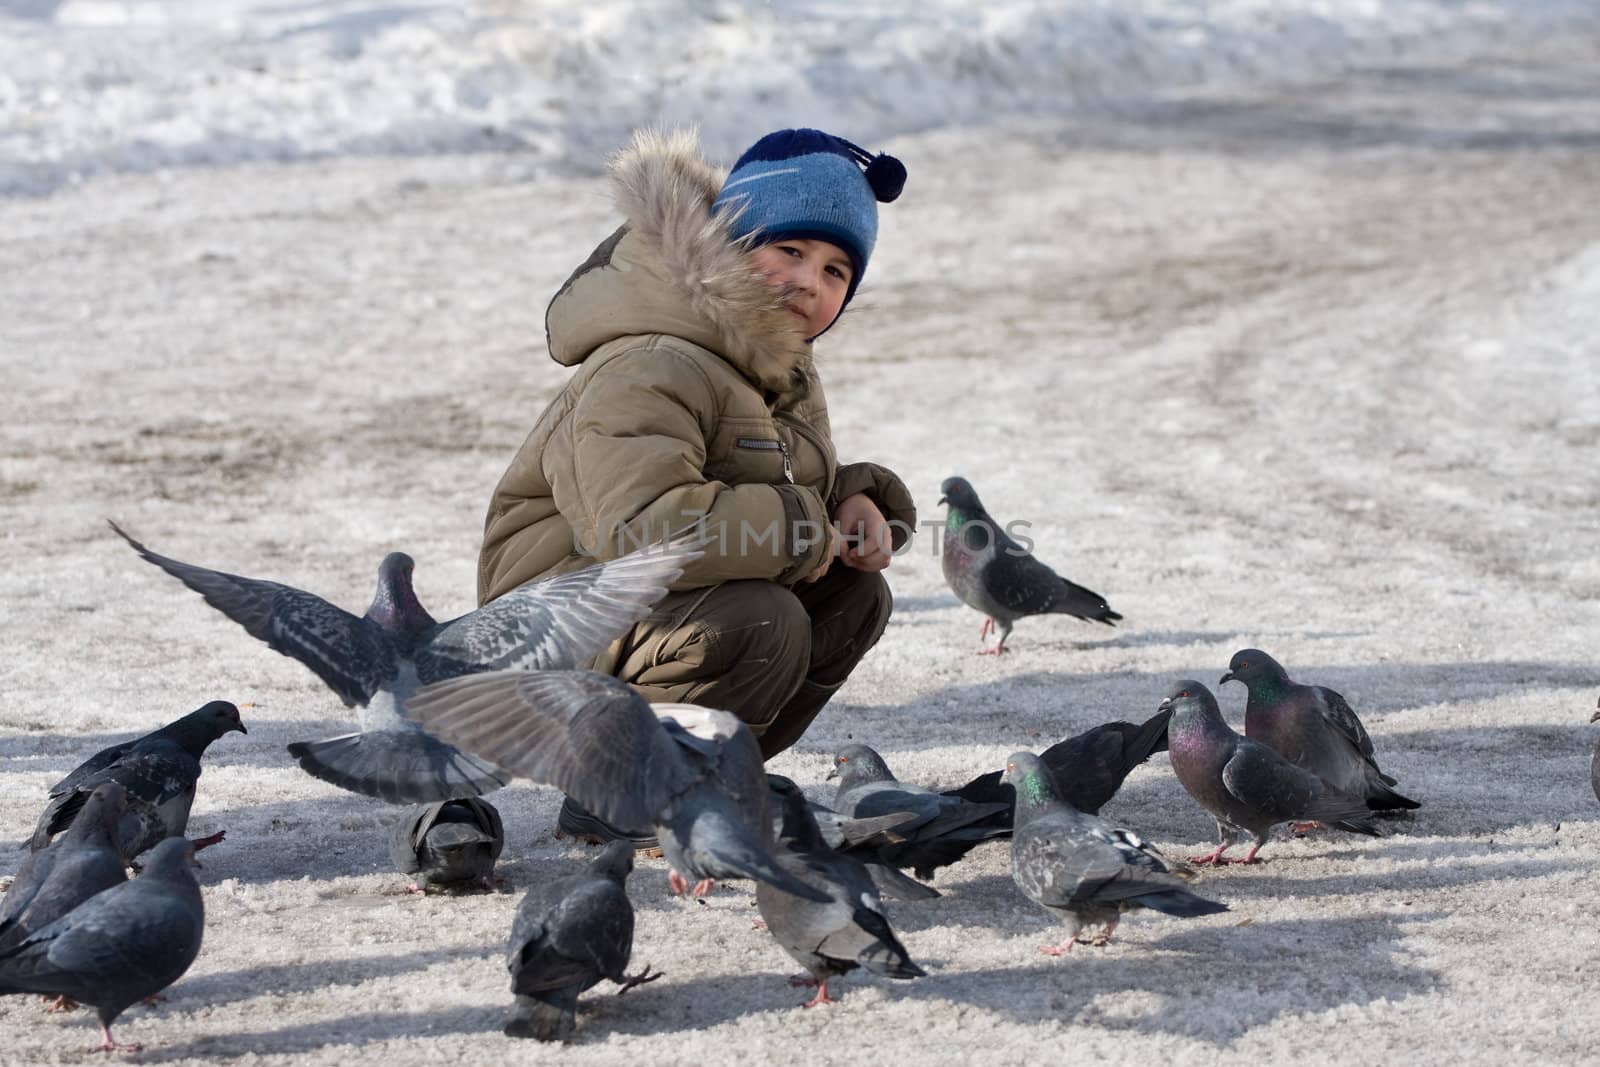 The boy feeds pigeons in the winter